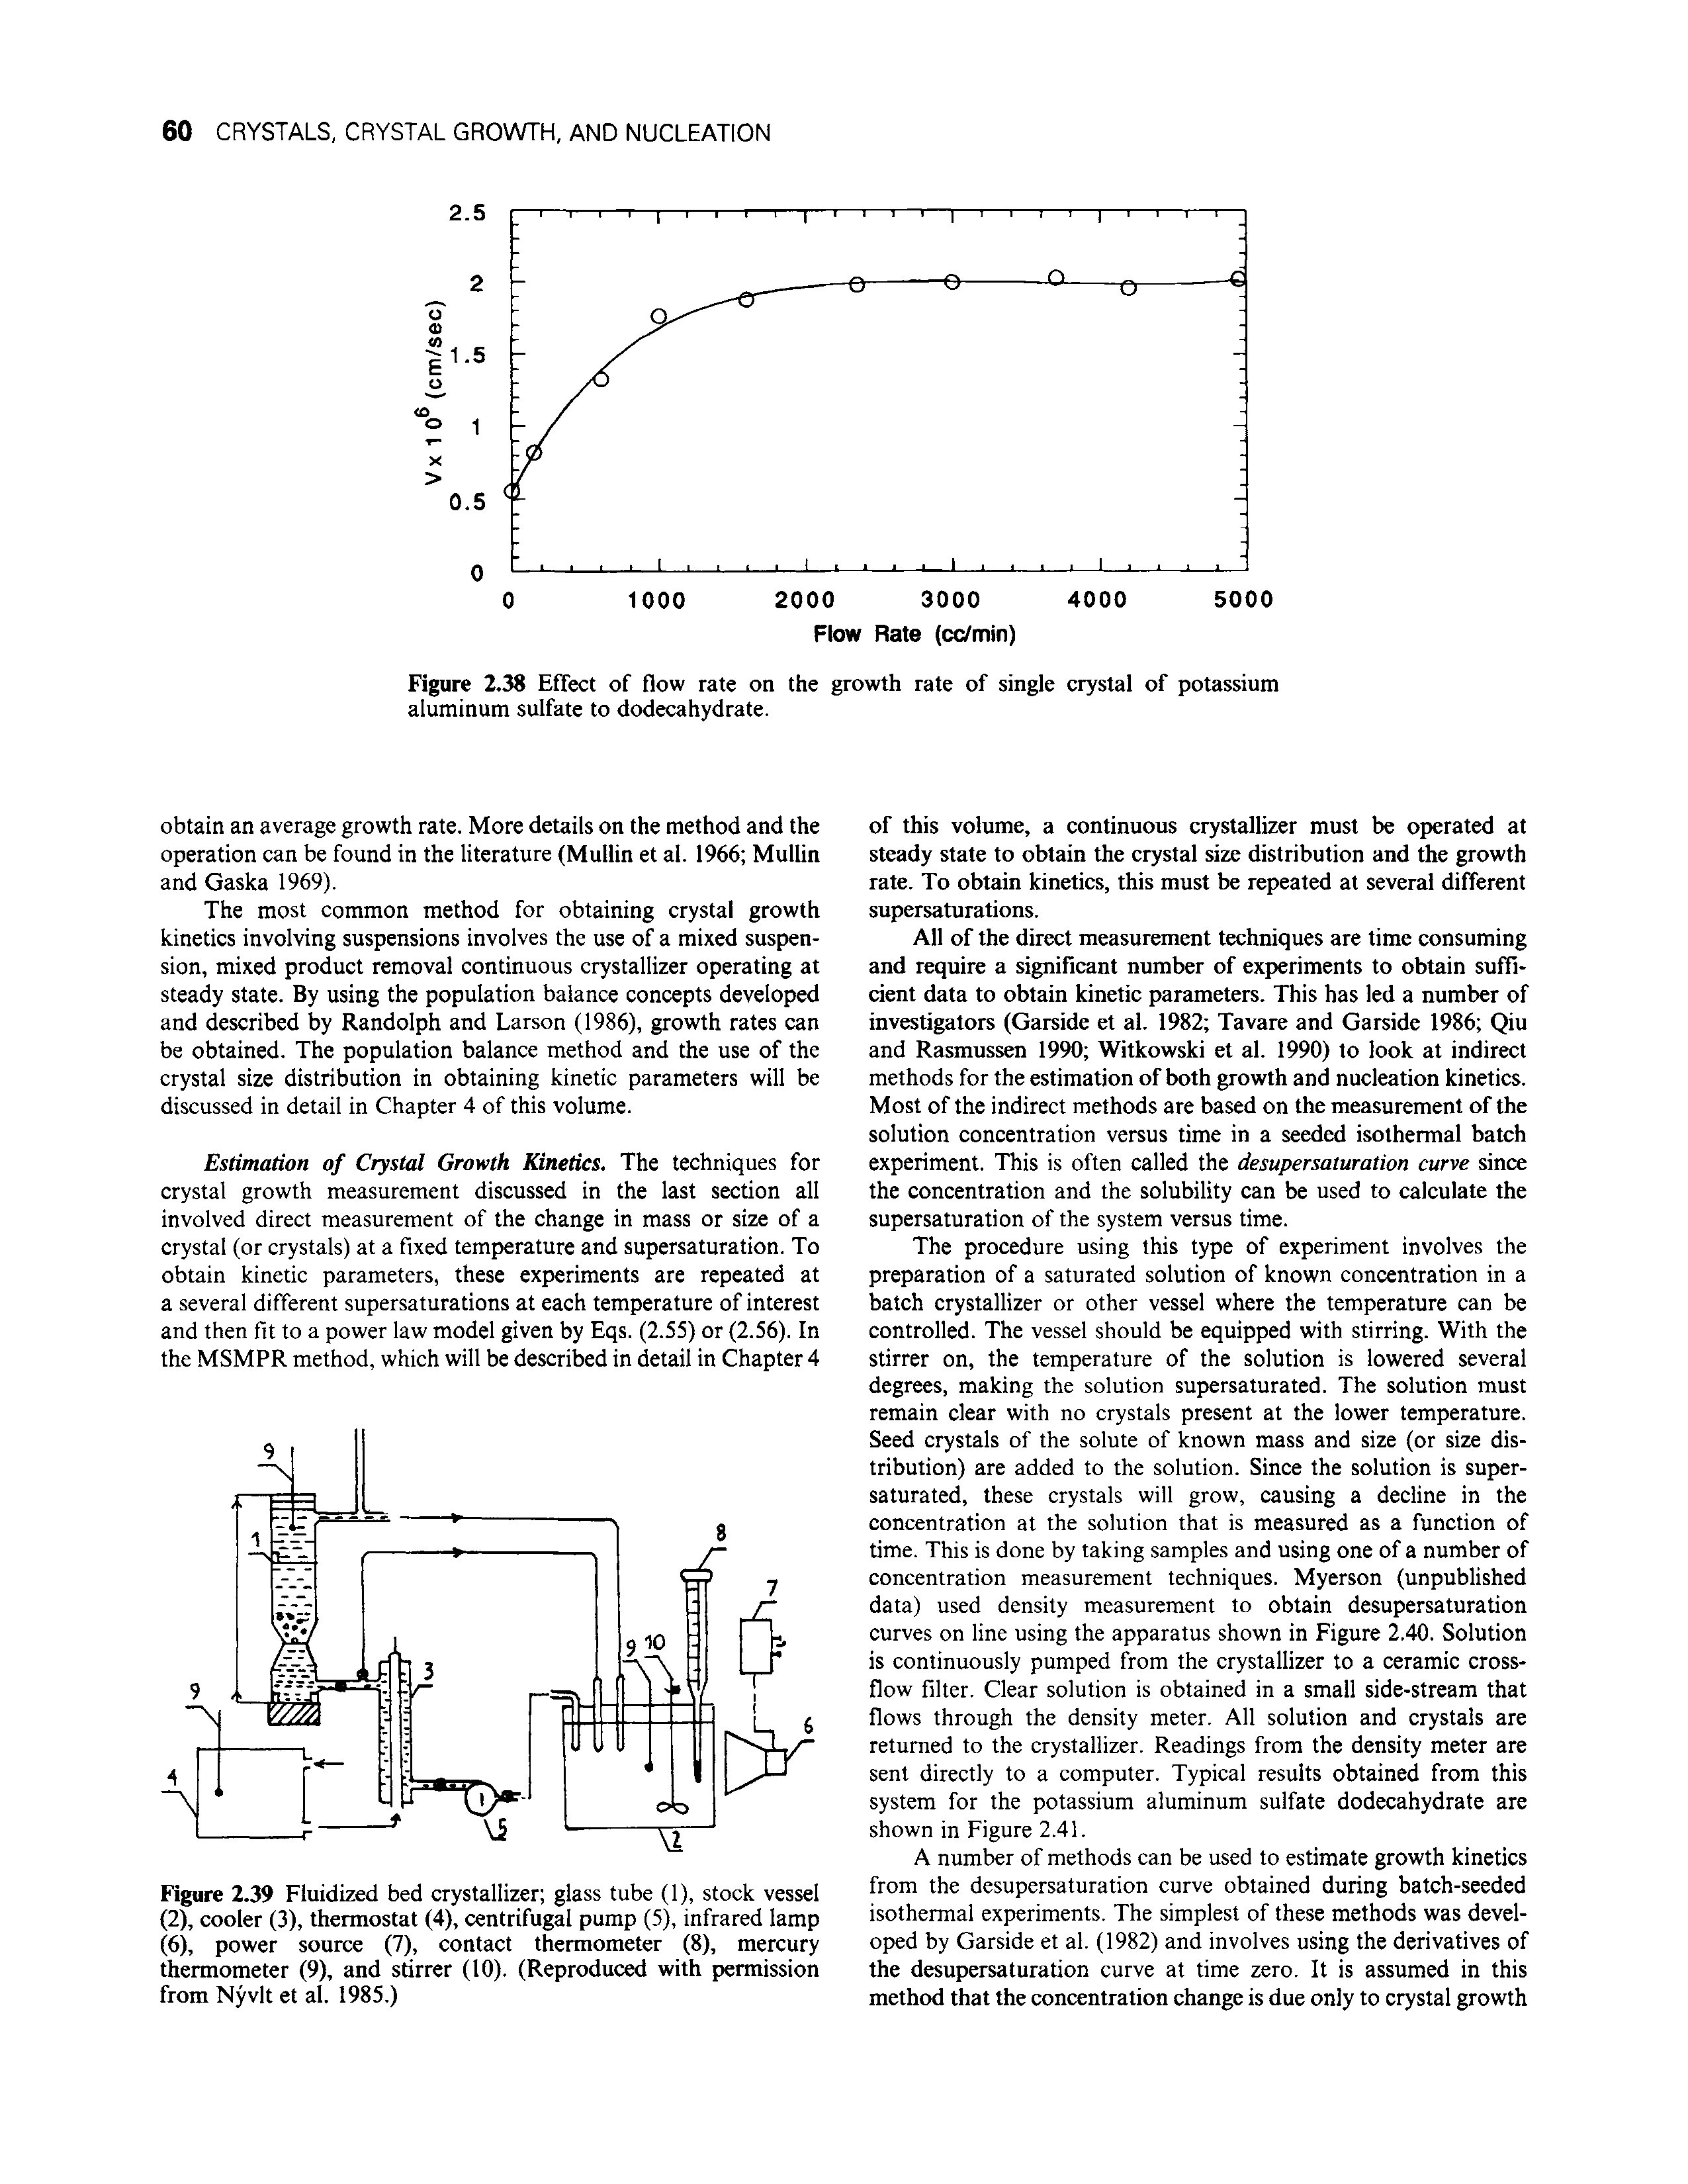 Figure 2.38 Effect of flow rate on the growth rate of single crystal of potassium aluminum sulfate to dodecahydrate.